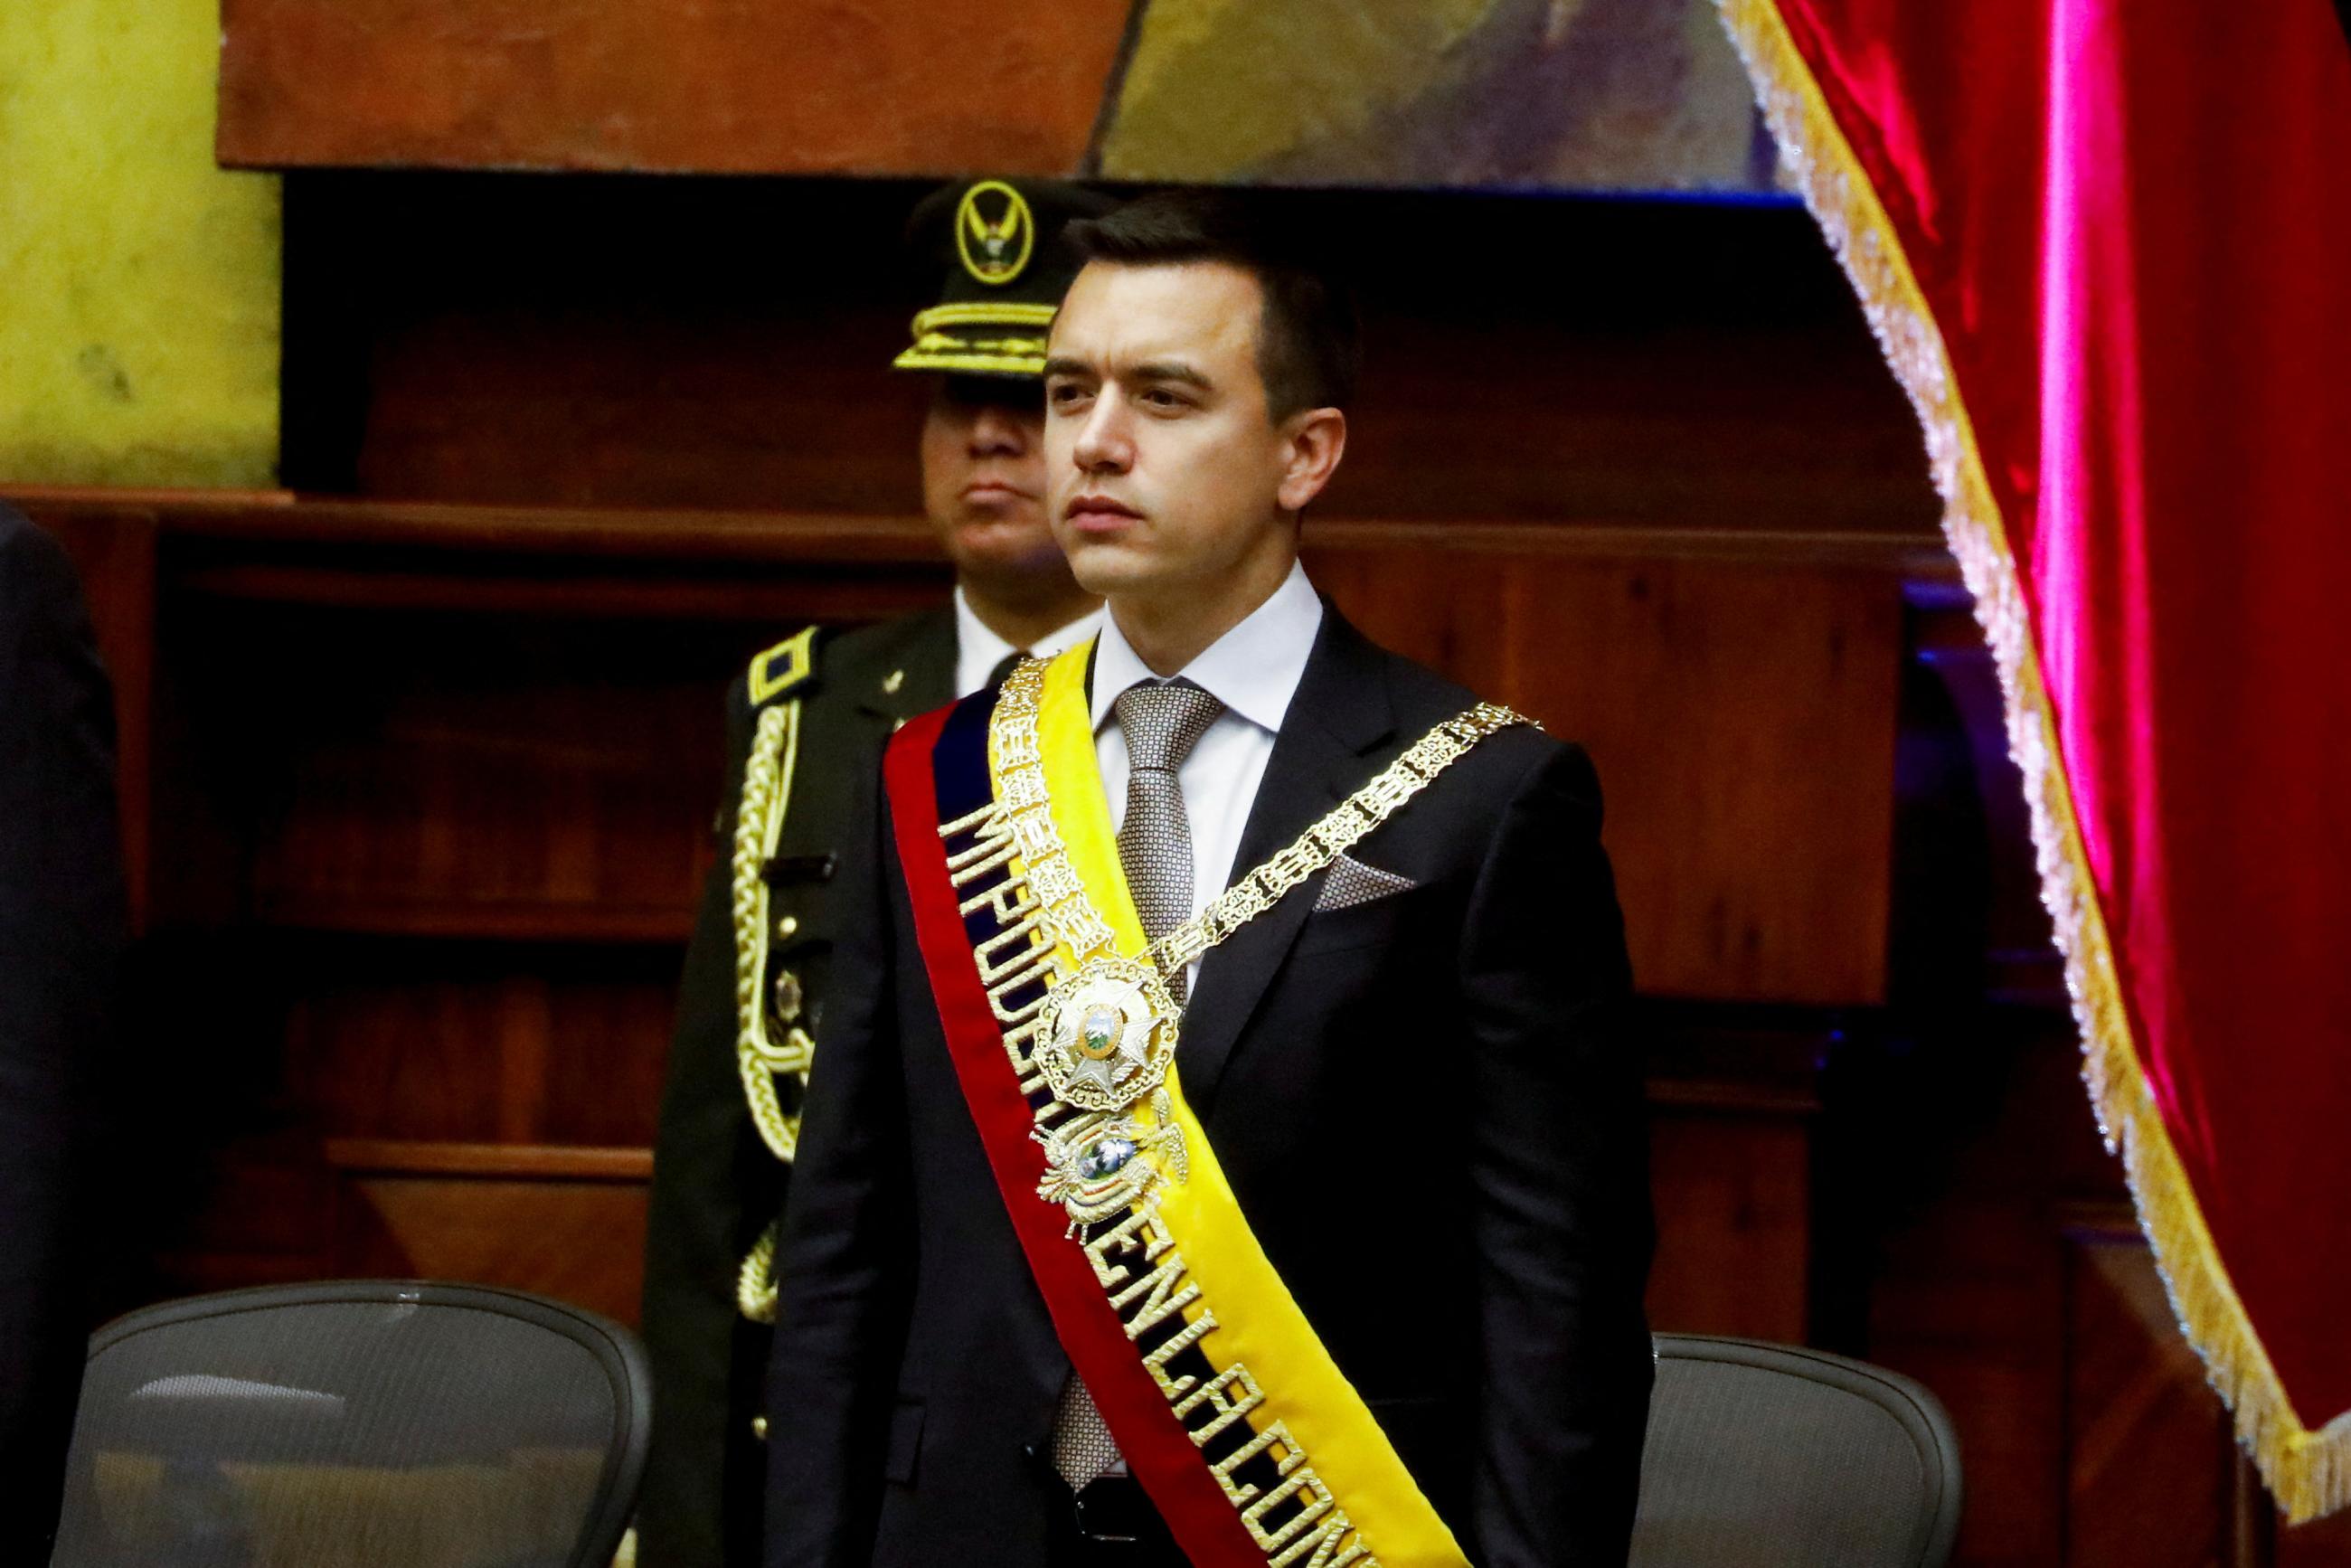 Ecuador's President Daniel Noboa looks on during his swearing-in ceremony.